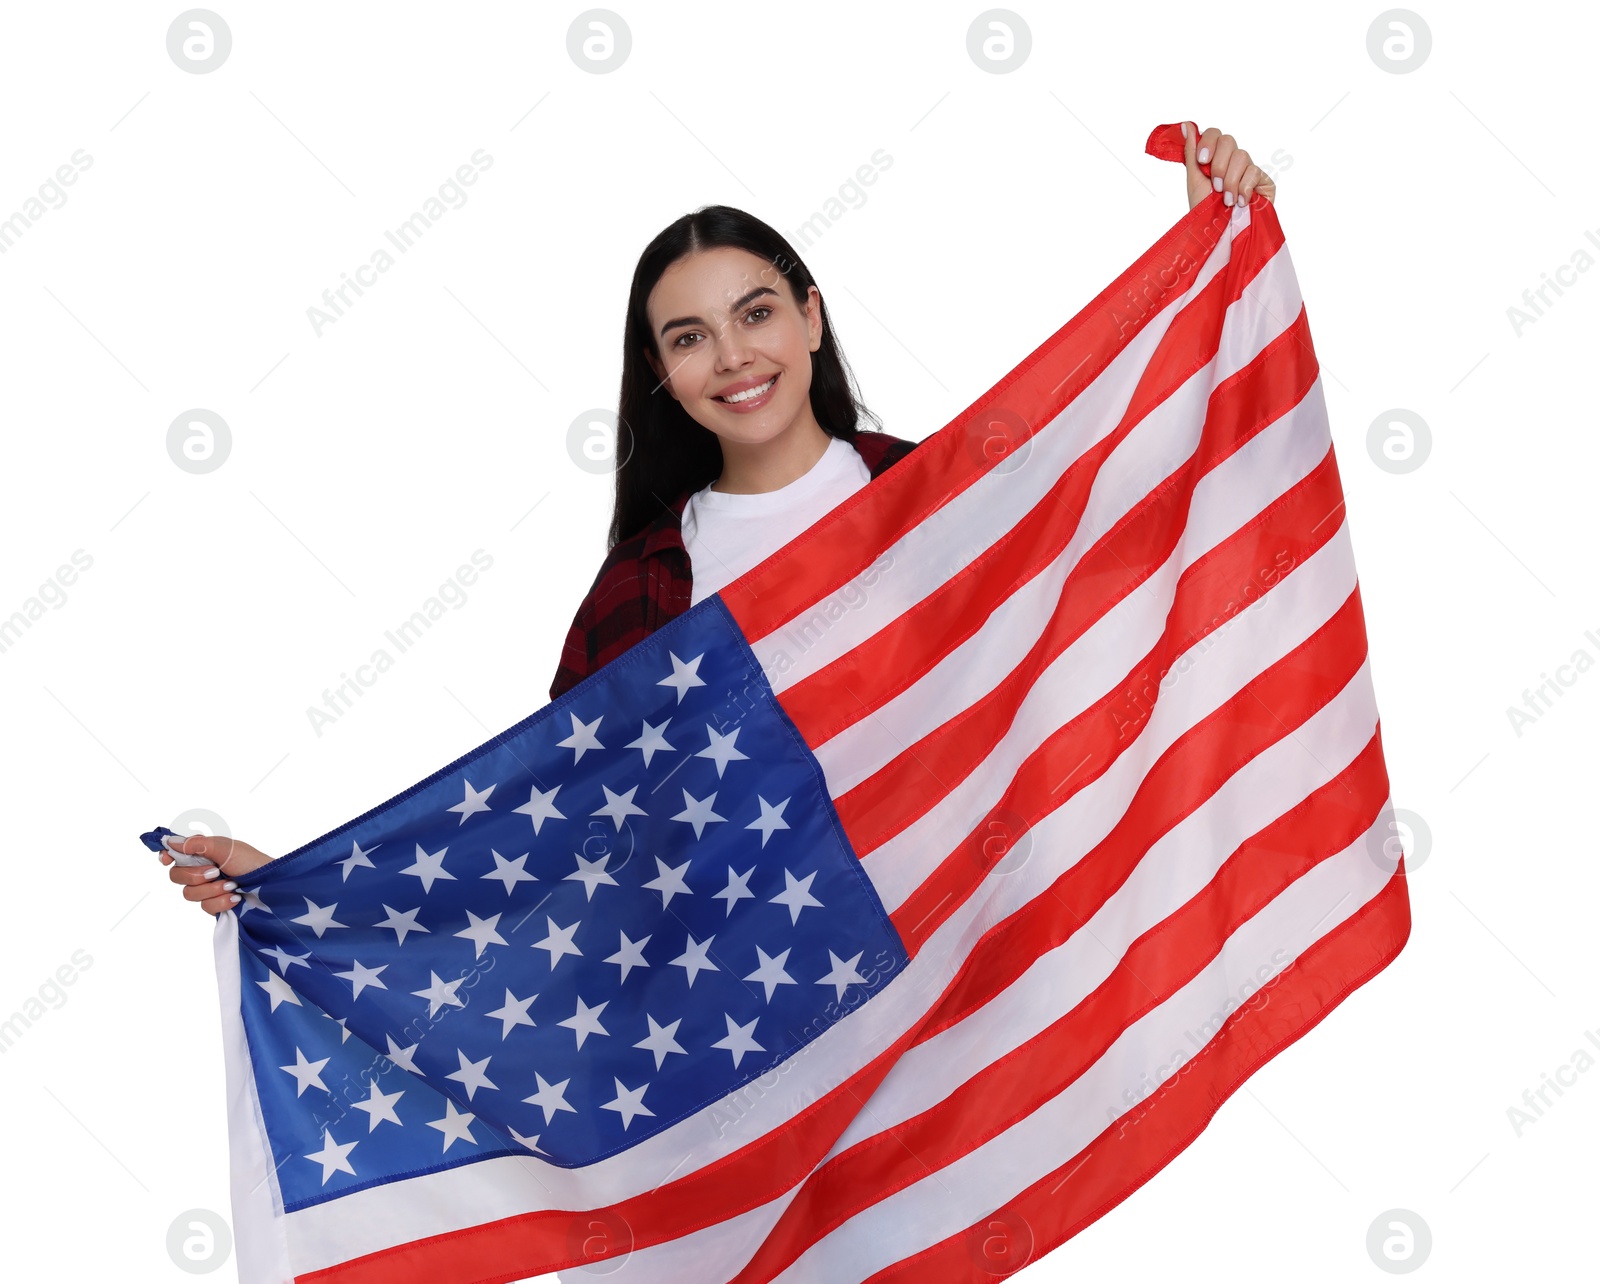 Image of 4th of July - Independence day of America. Happy woman holding national flag of United States on white background